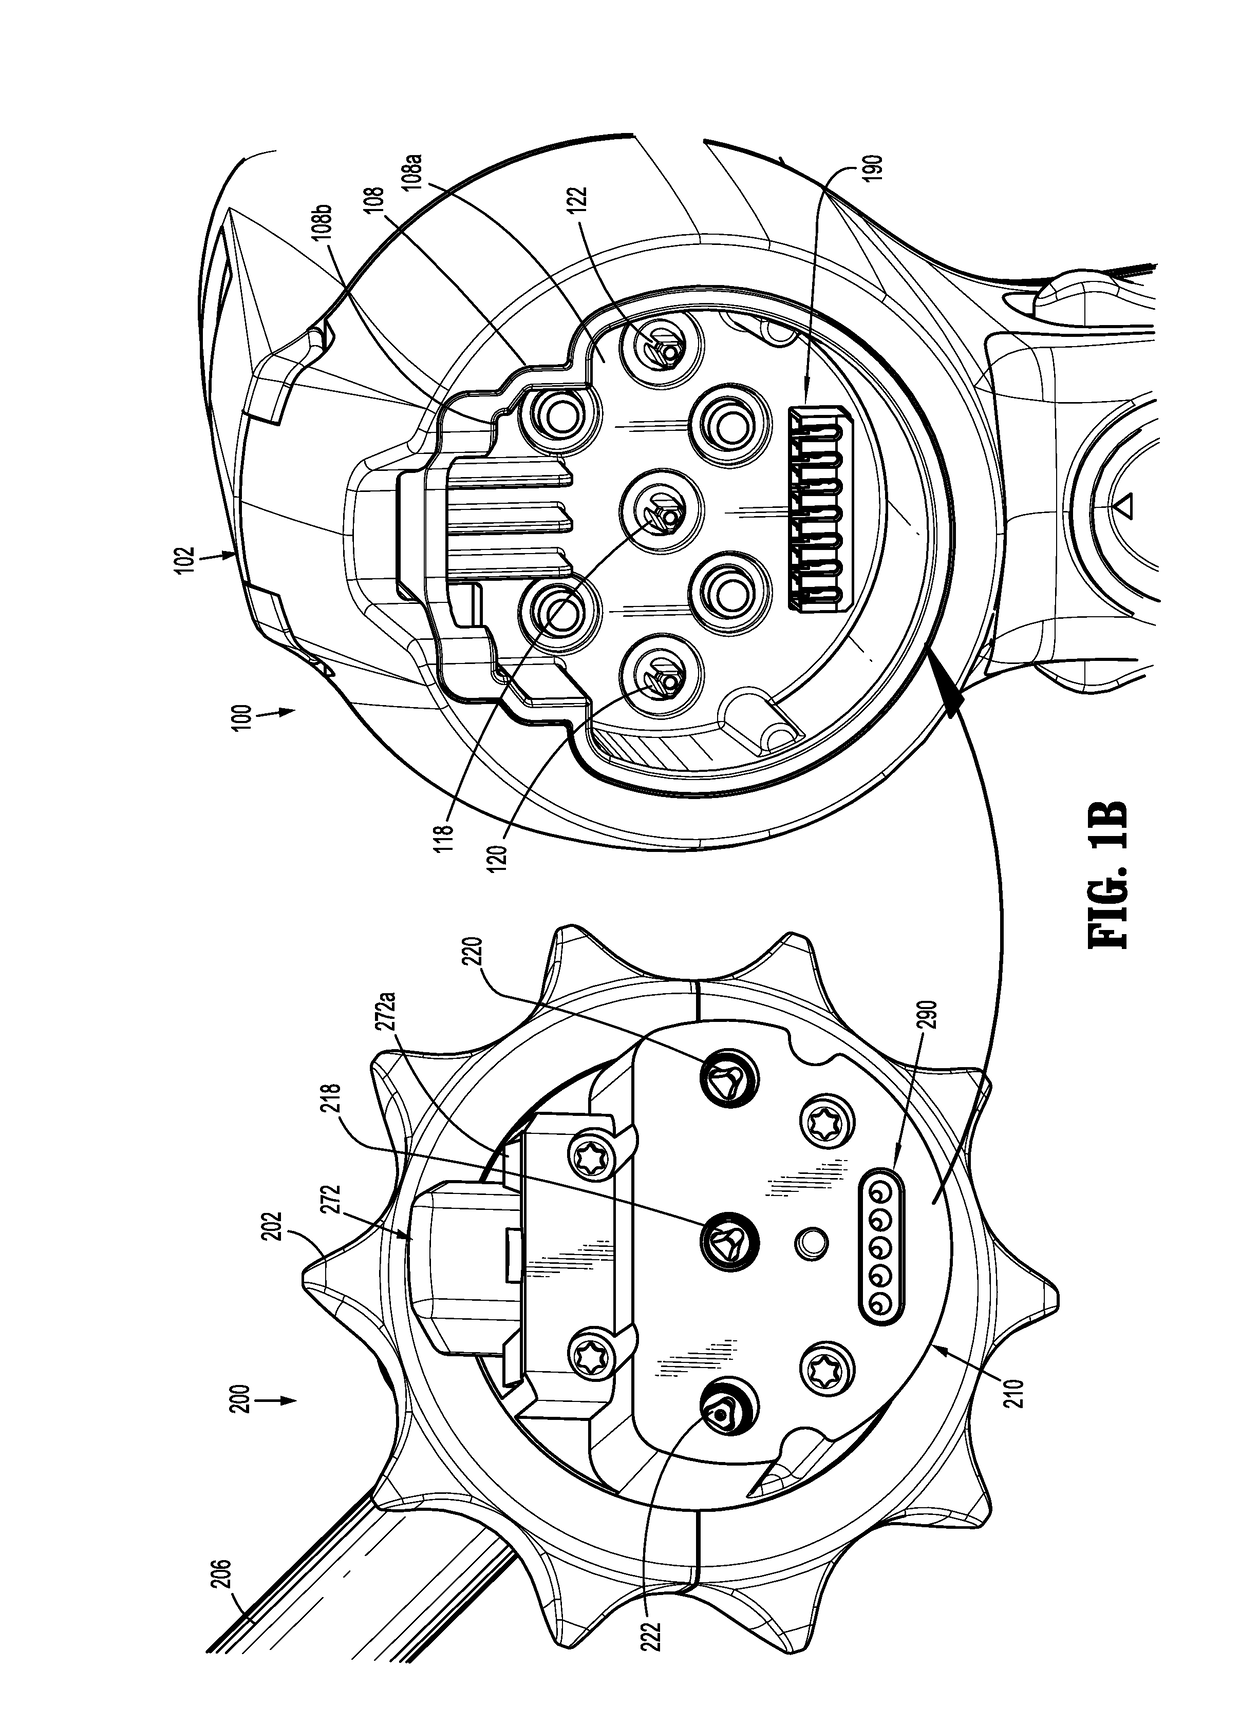 Adapter assembly for interconnecting electromechanical surgical devices and surgical loading units, and surgical systems thereof